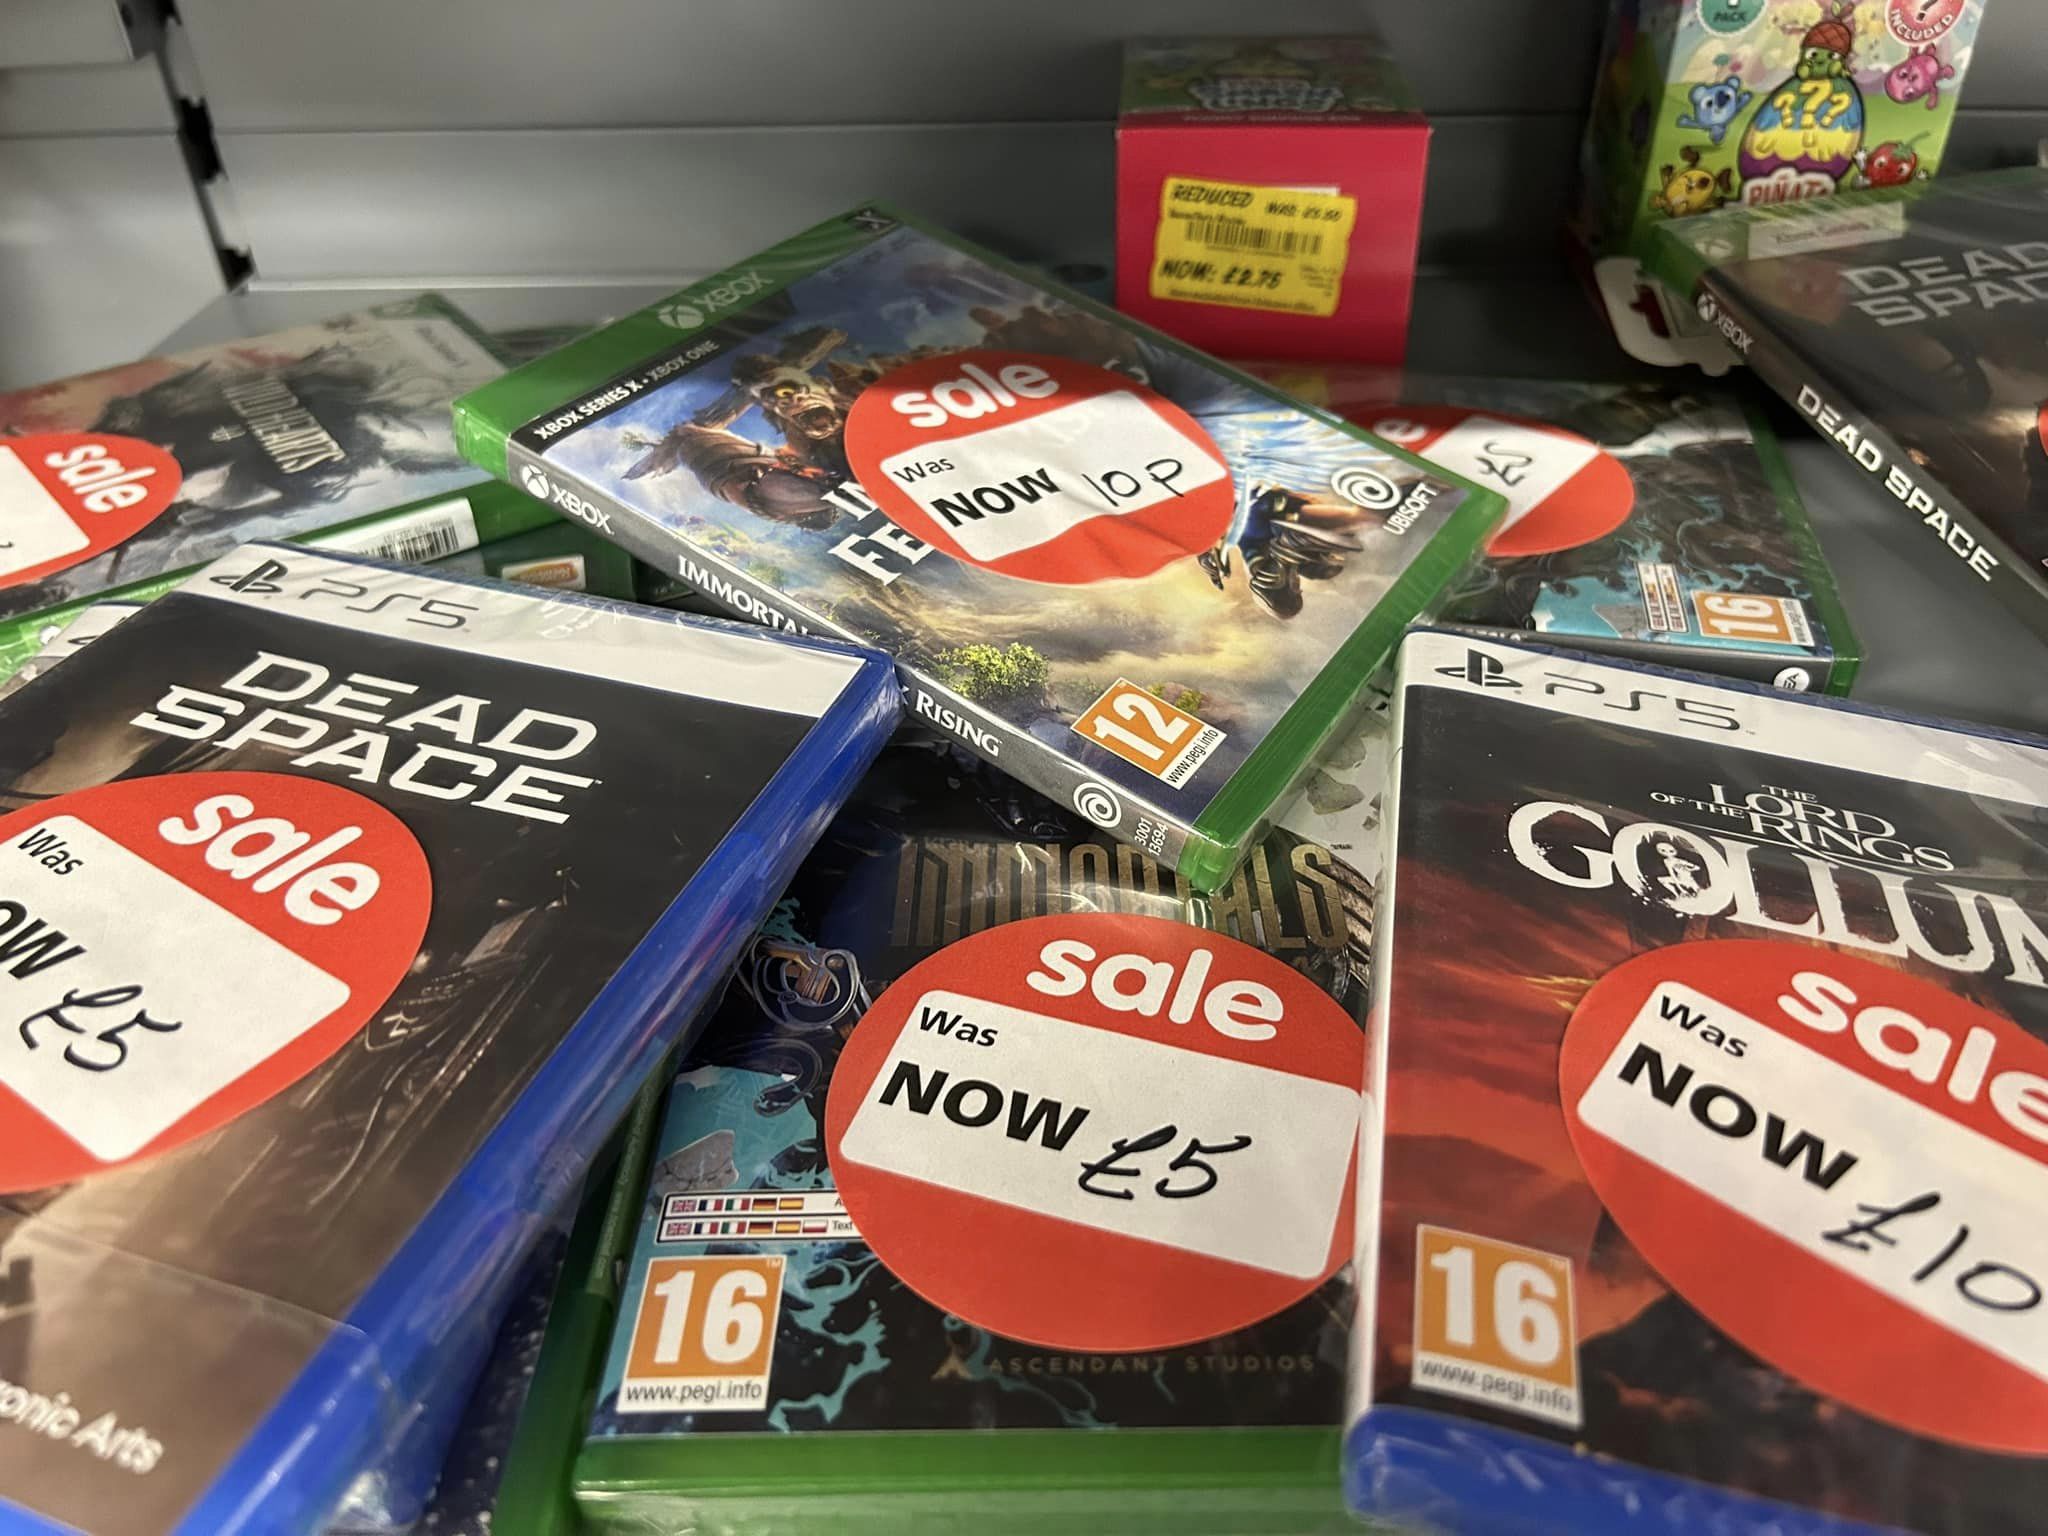 The deal offers video games for surprisingly low prices